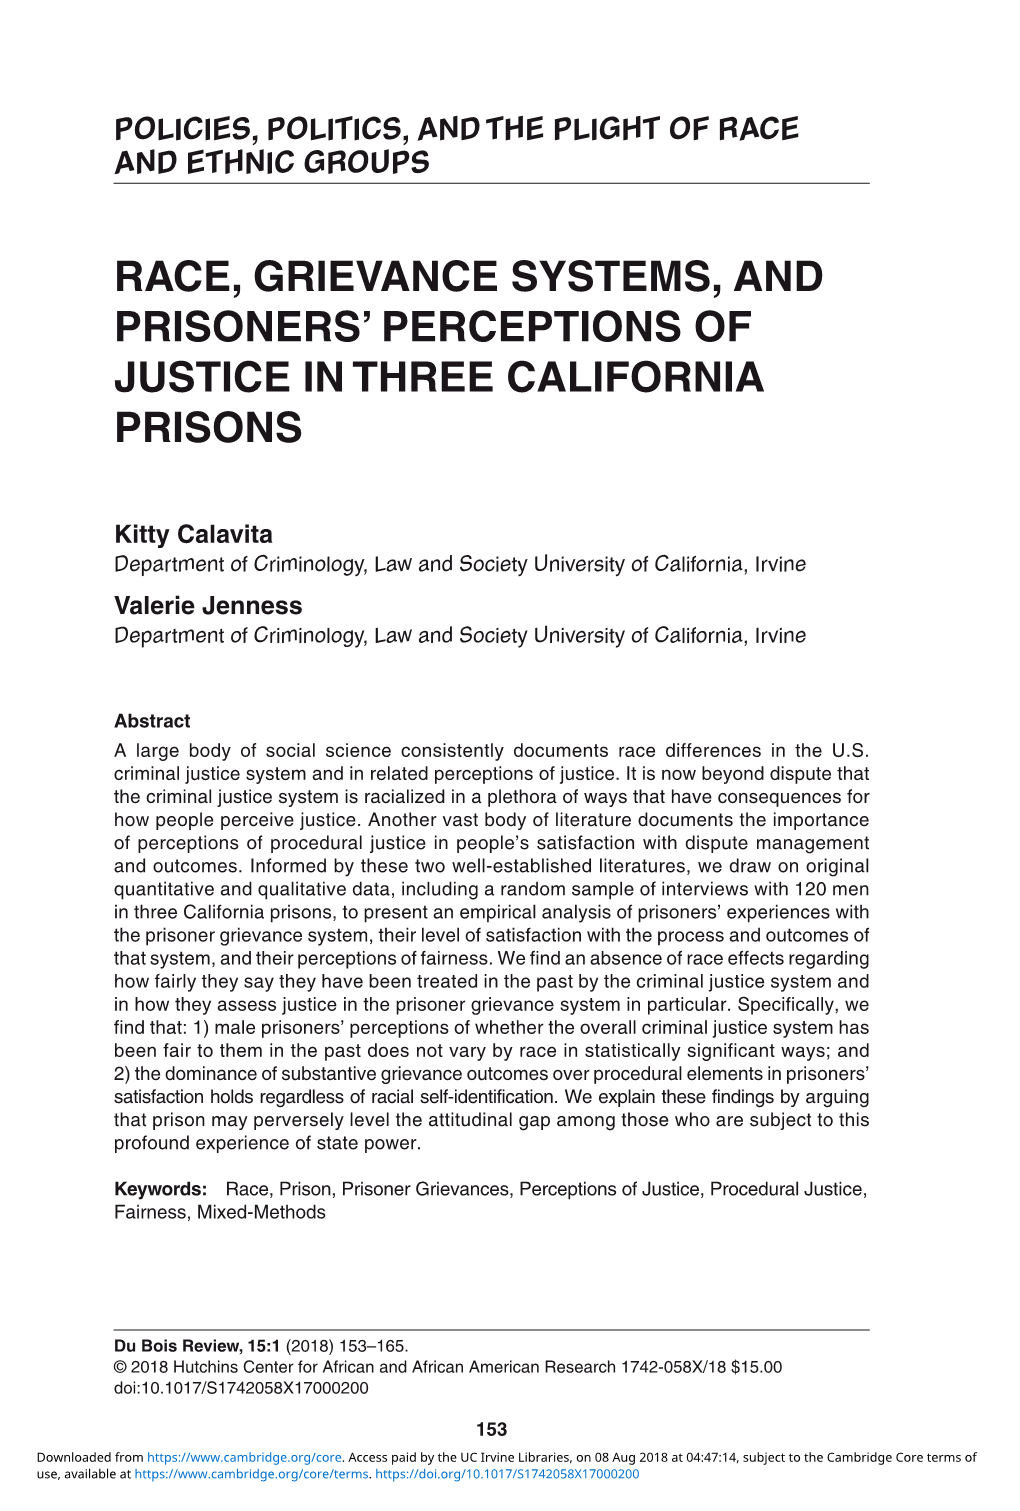 Race, Grievance Systems, and Prisoners' Perceptions of Justice In